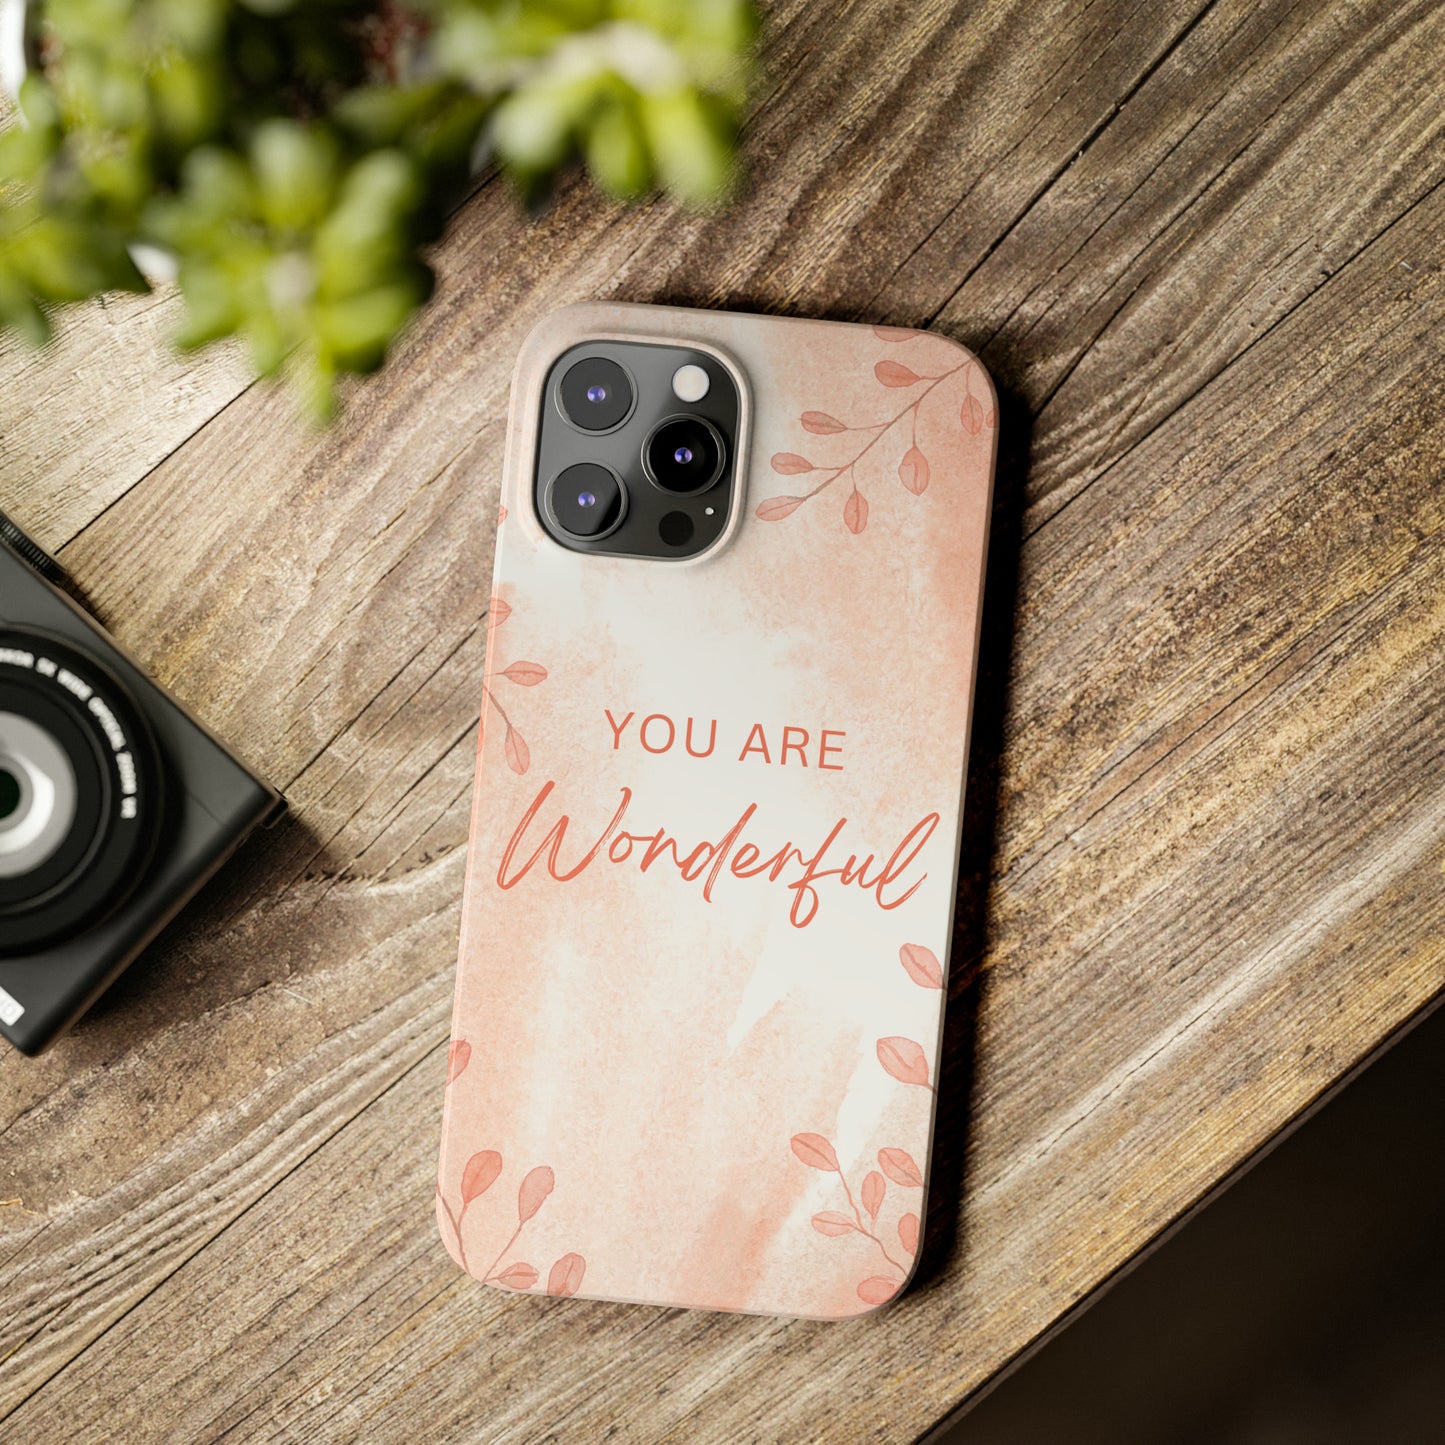 You Are Wonderful Slim Phone Cases